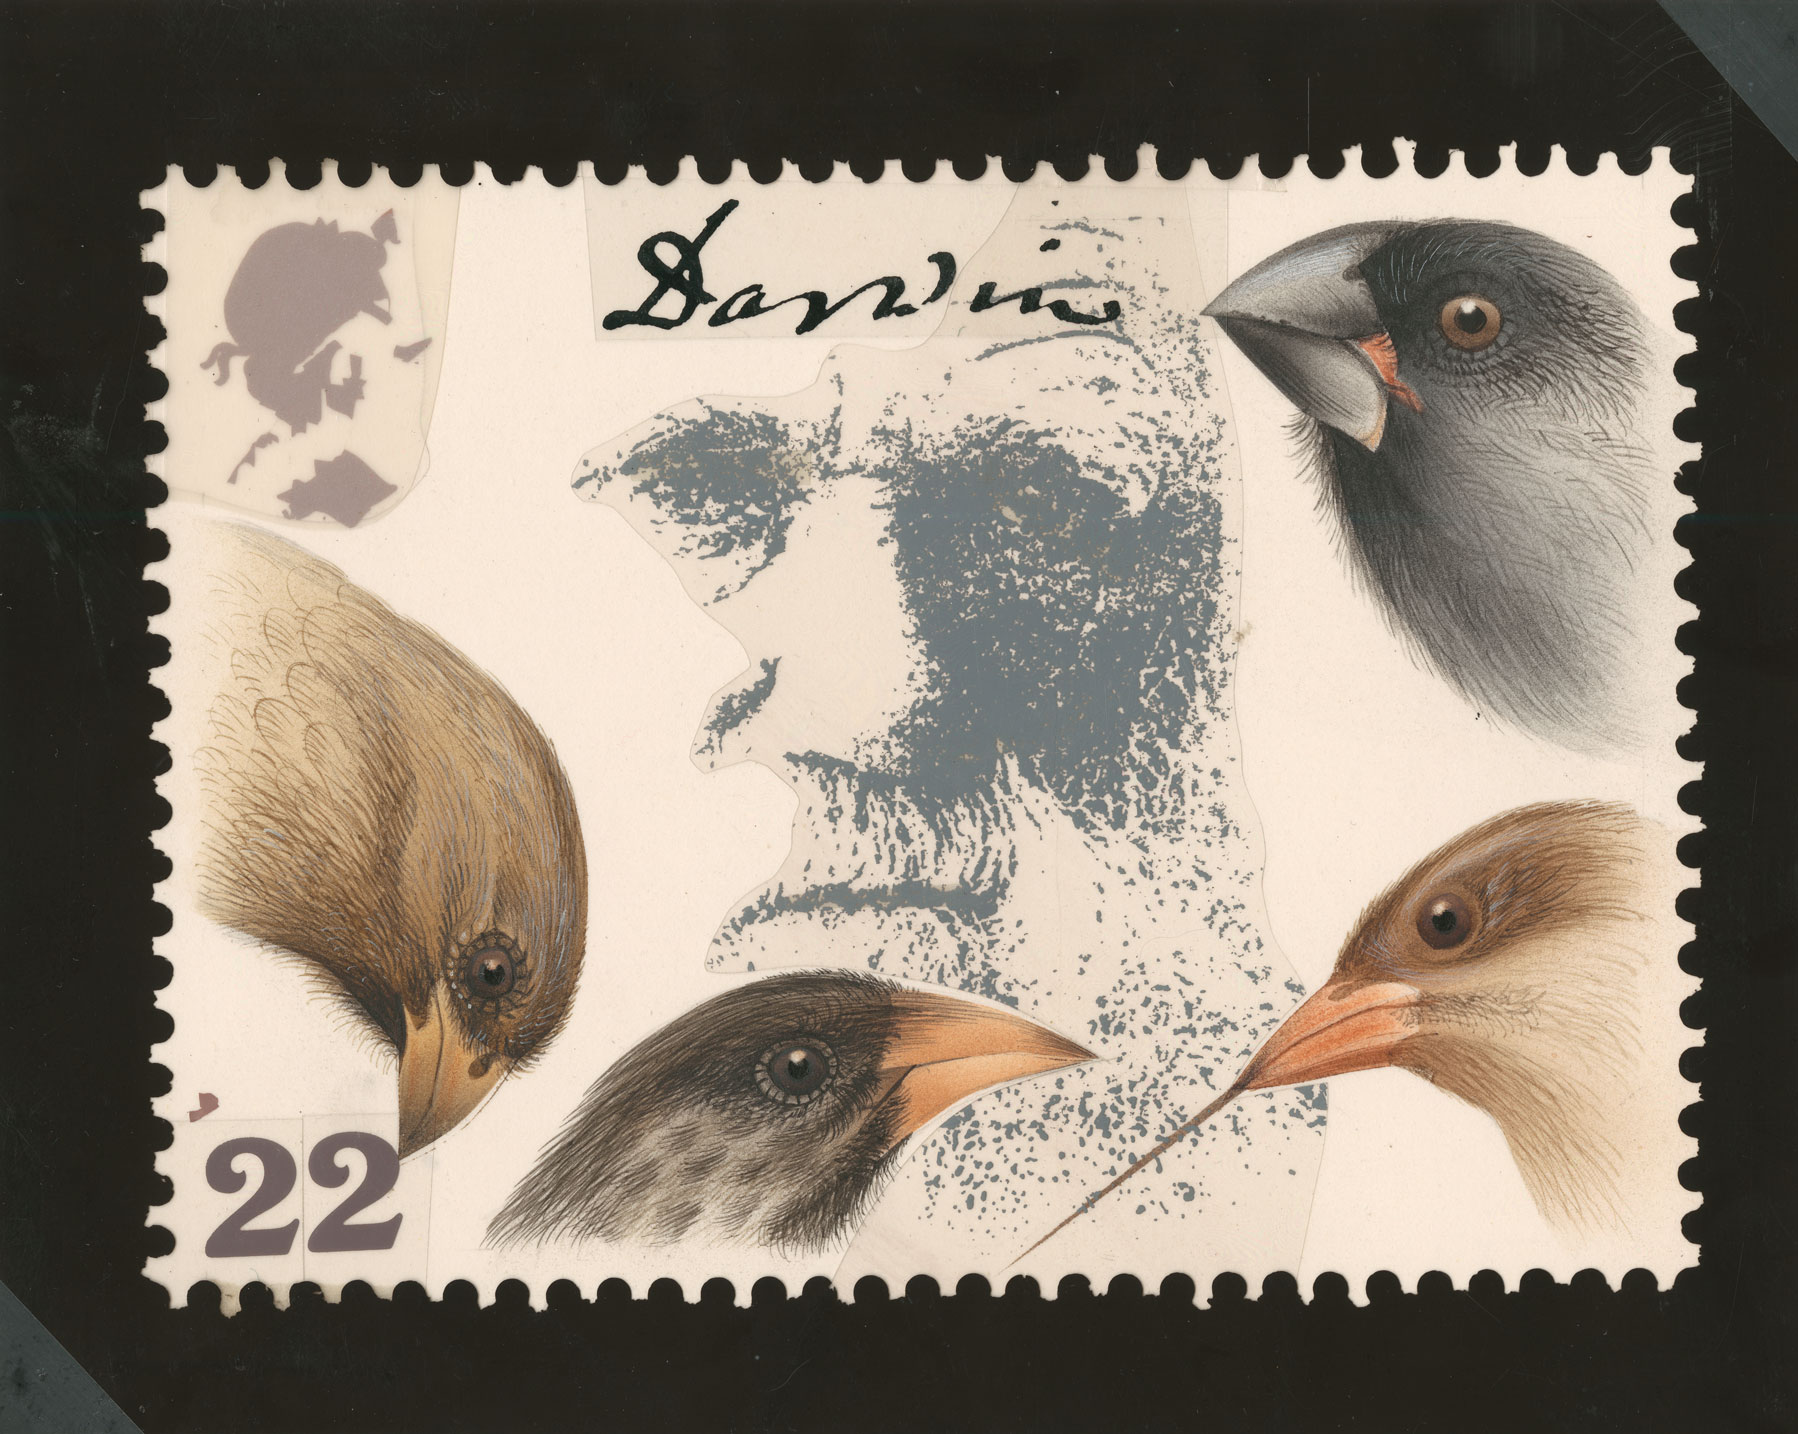 Painting of different finch beaks with an image of Darwin and his signature.